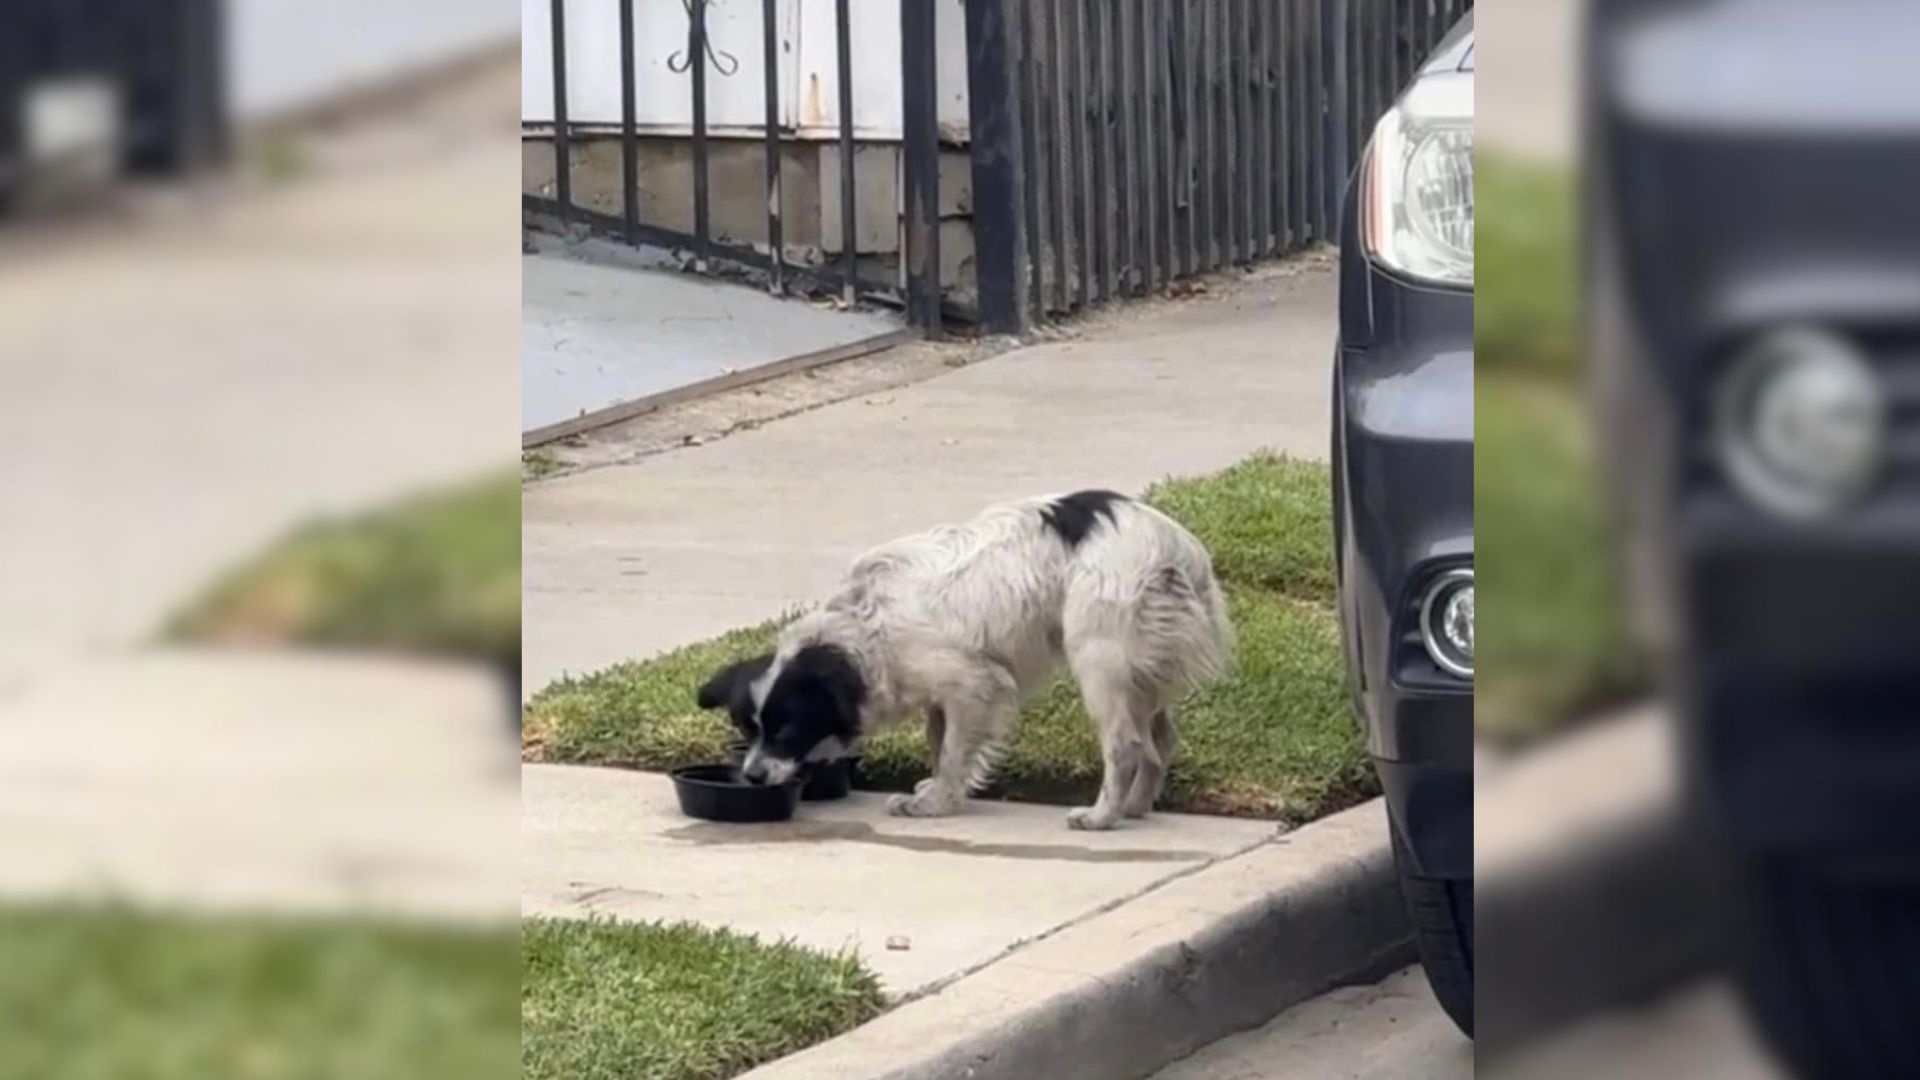 Dog Dumped On A Busy Street By His Owner Gets A New Chance When He Meets Someone Amazing